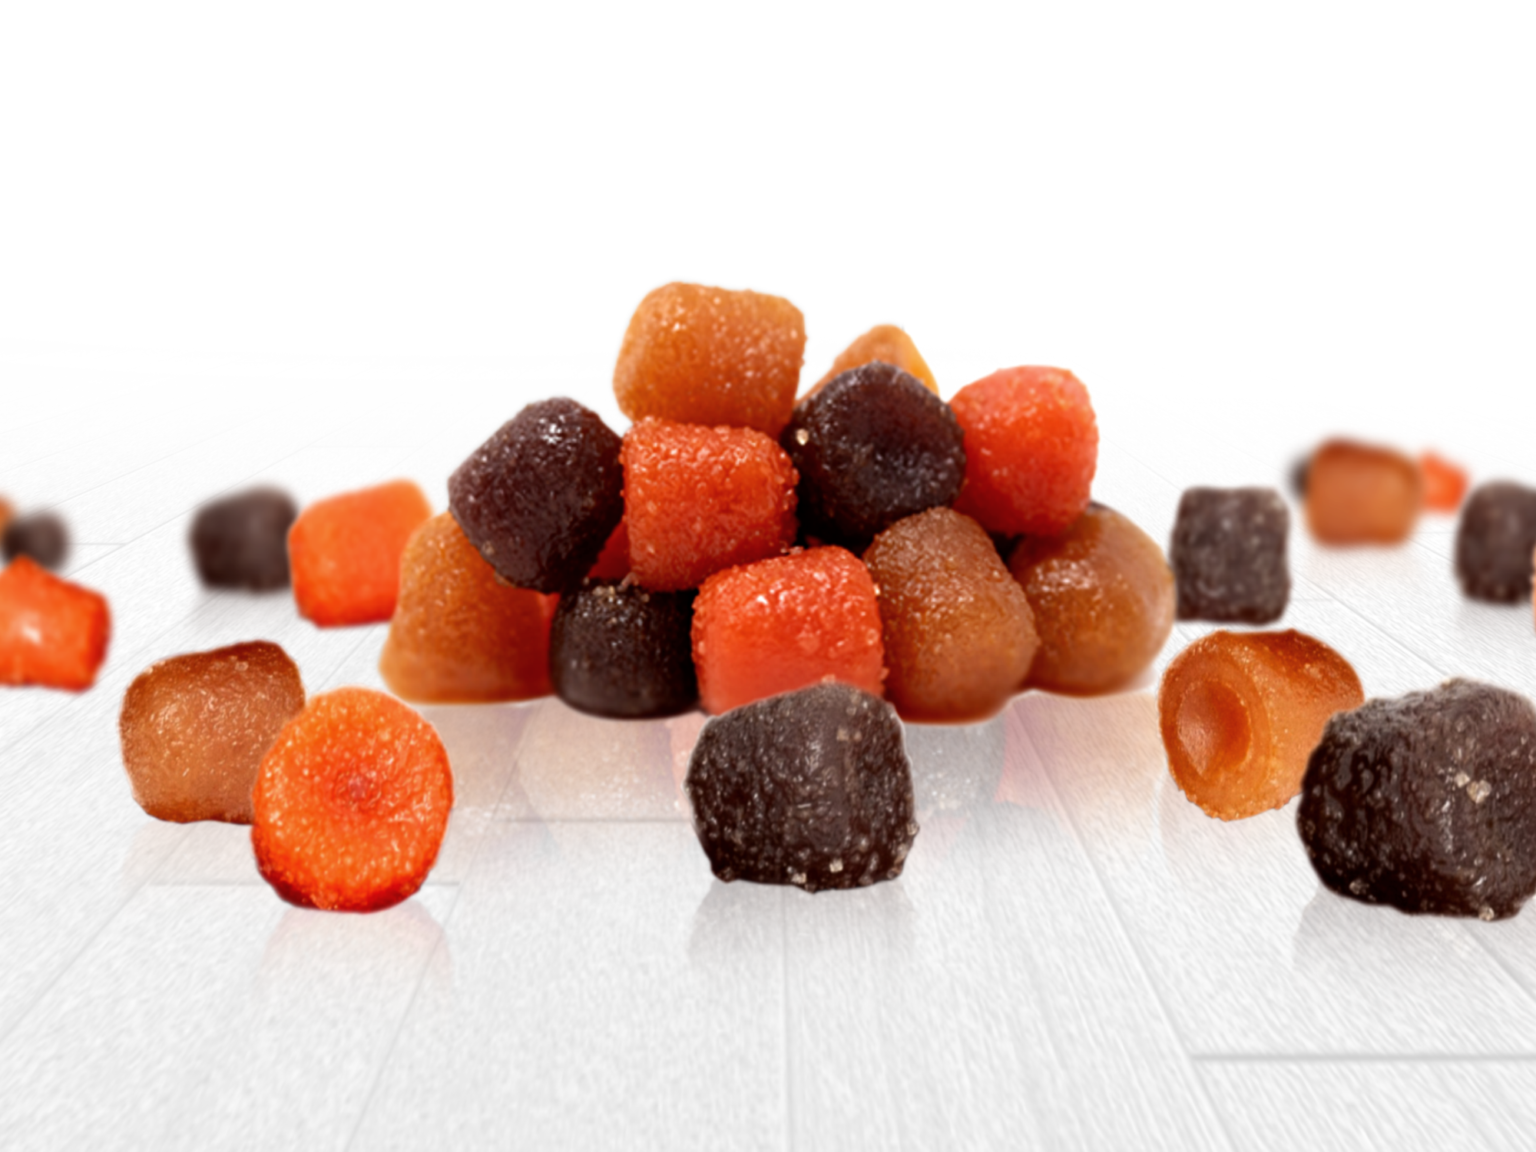 assorted_gummies-800x600-1-1536x1152.png